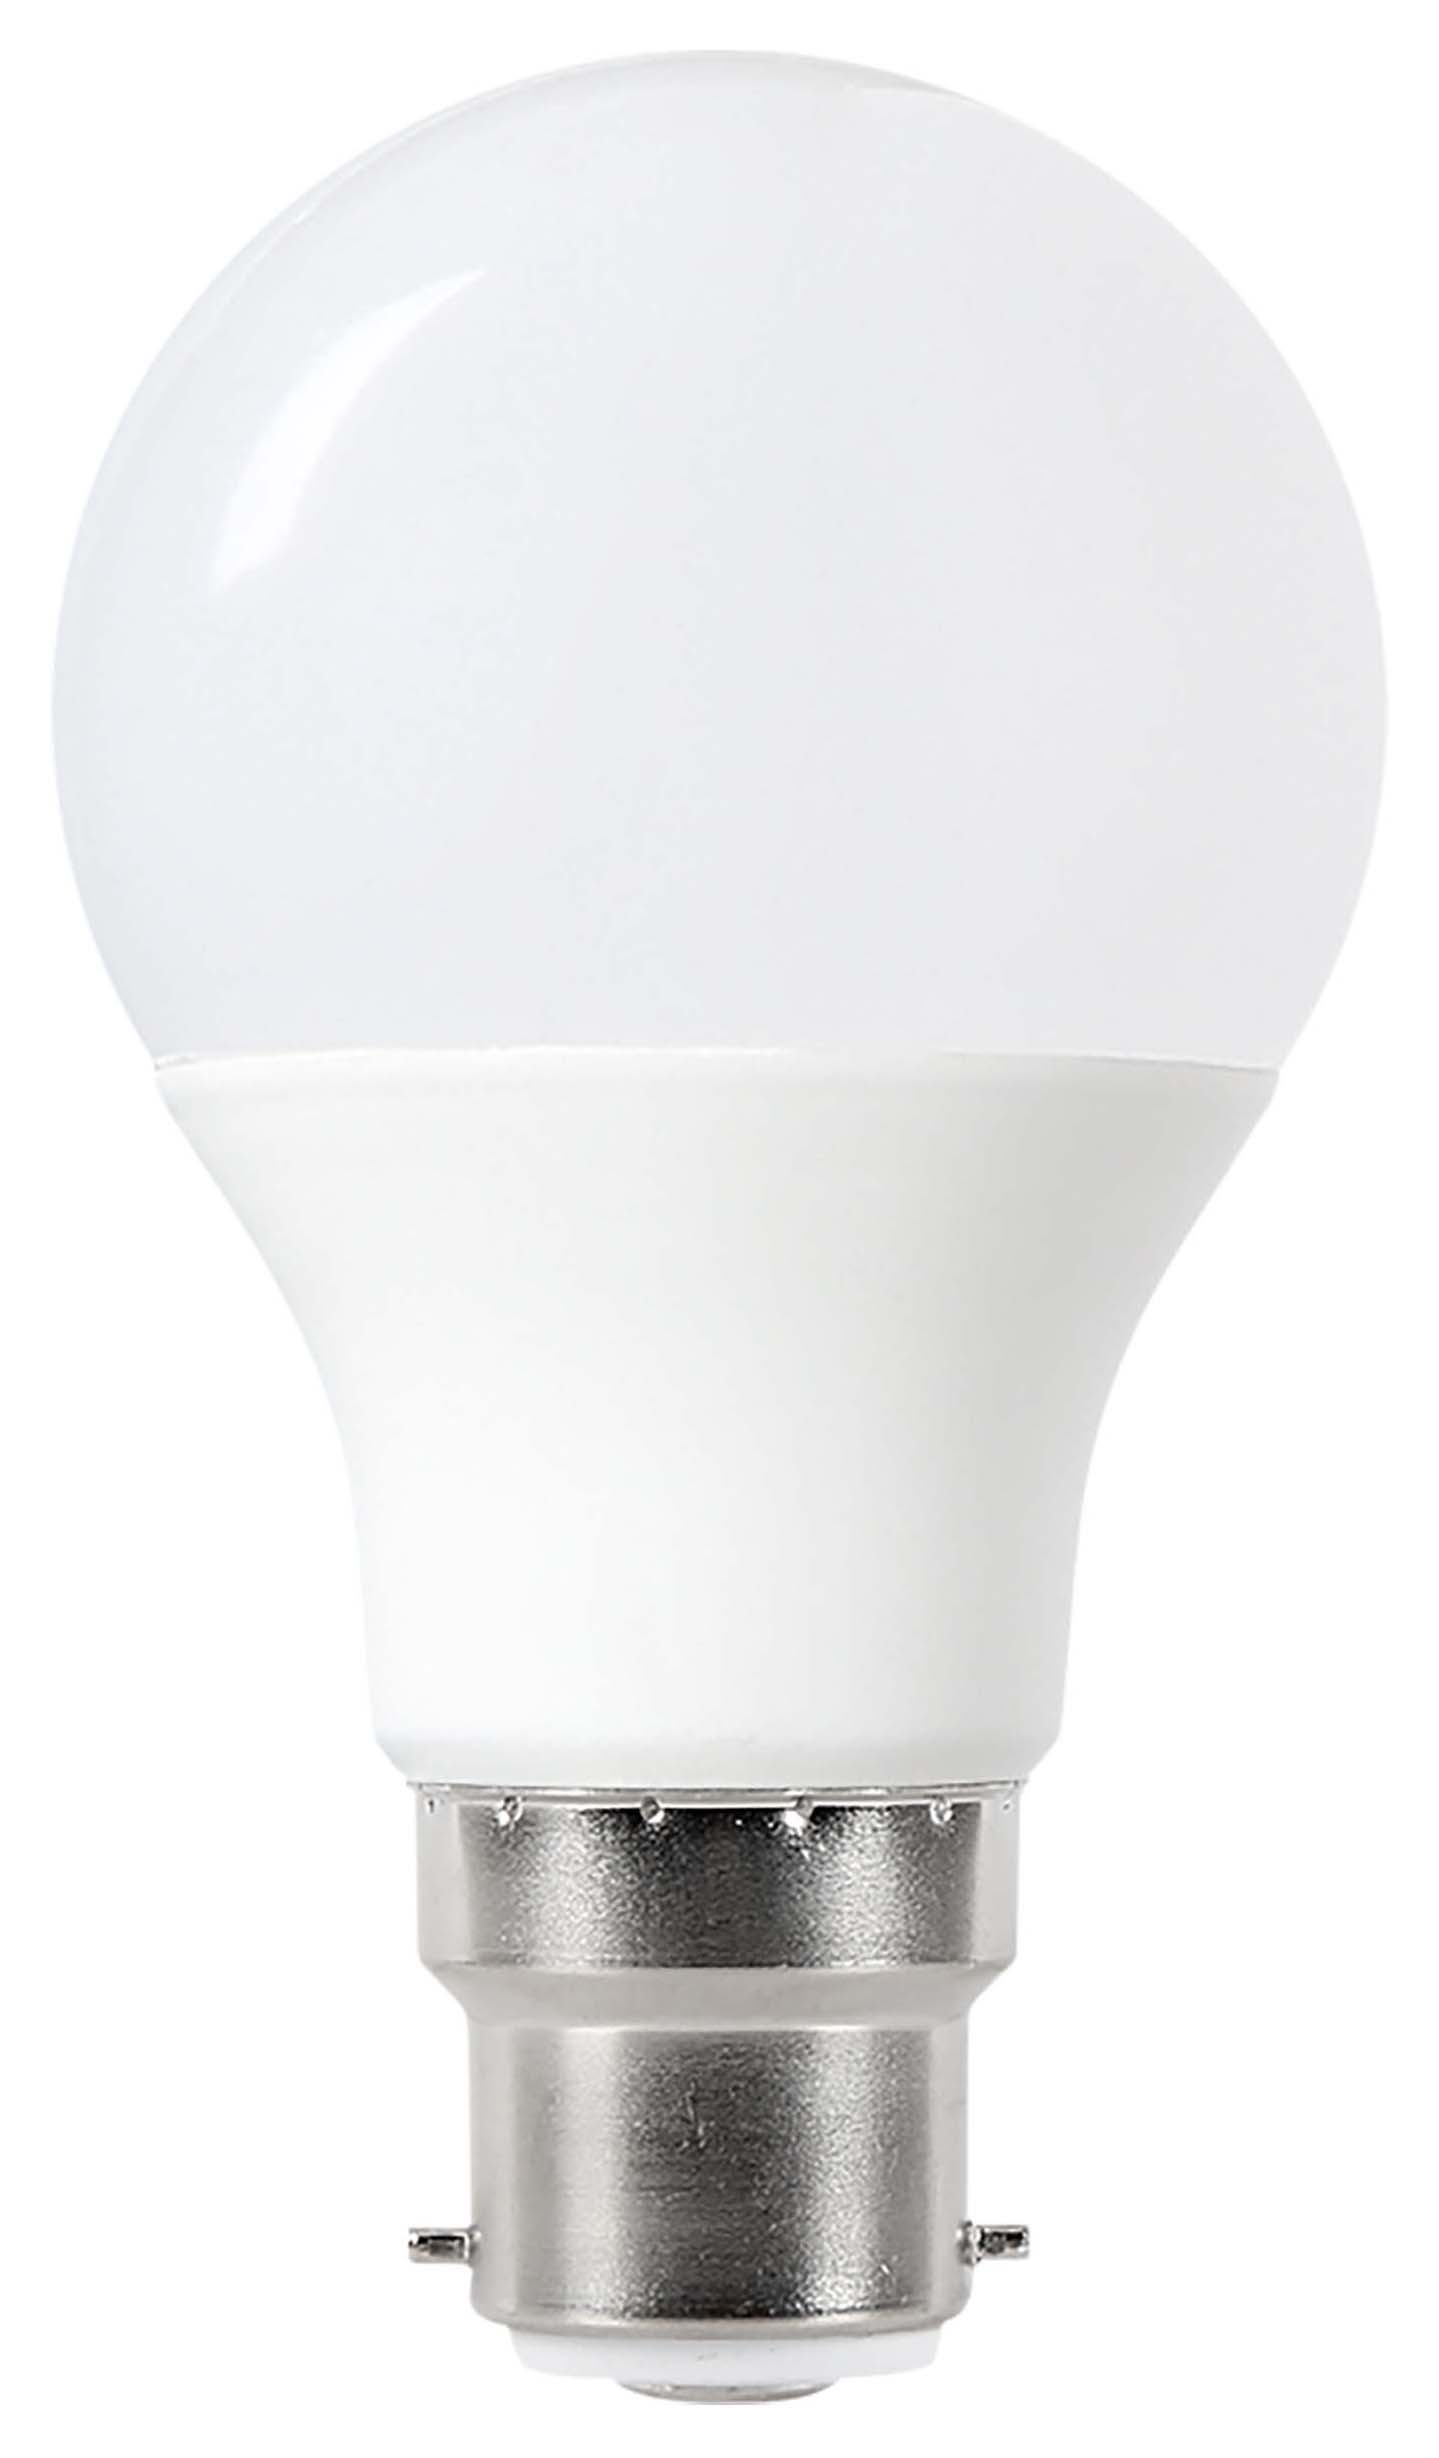 Image of Wickes Dimmable GLS LED B22 8.8W Warm White Light Bulb